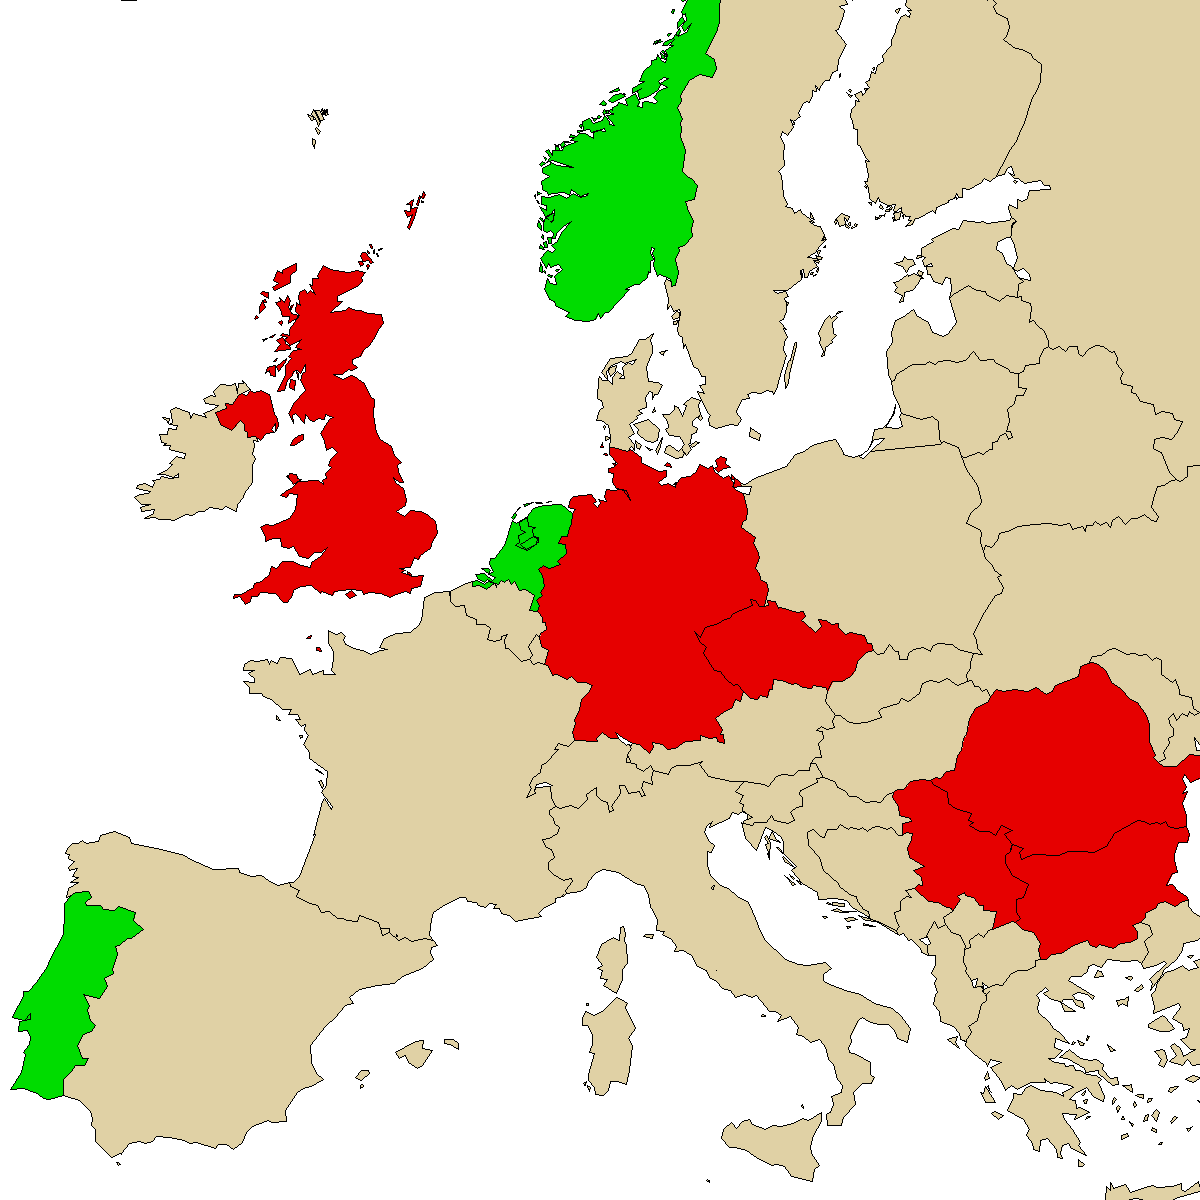 legal info map for our product 6APB, green are countries with no ban, red with ban, grey is unknown